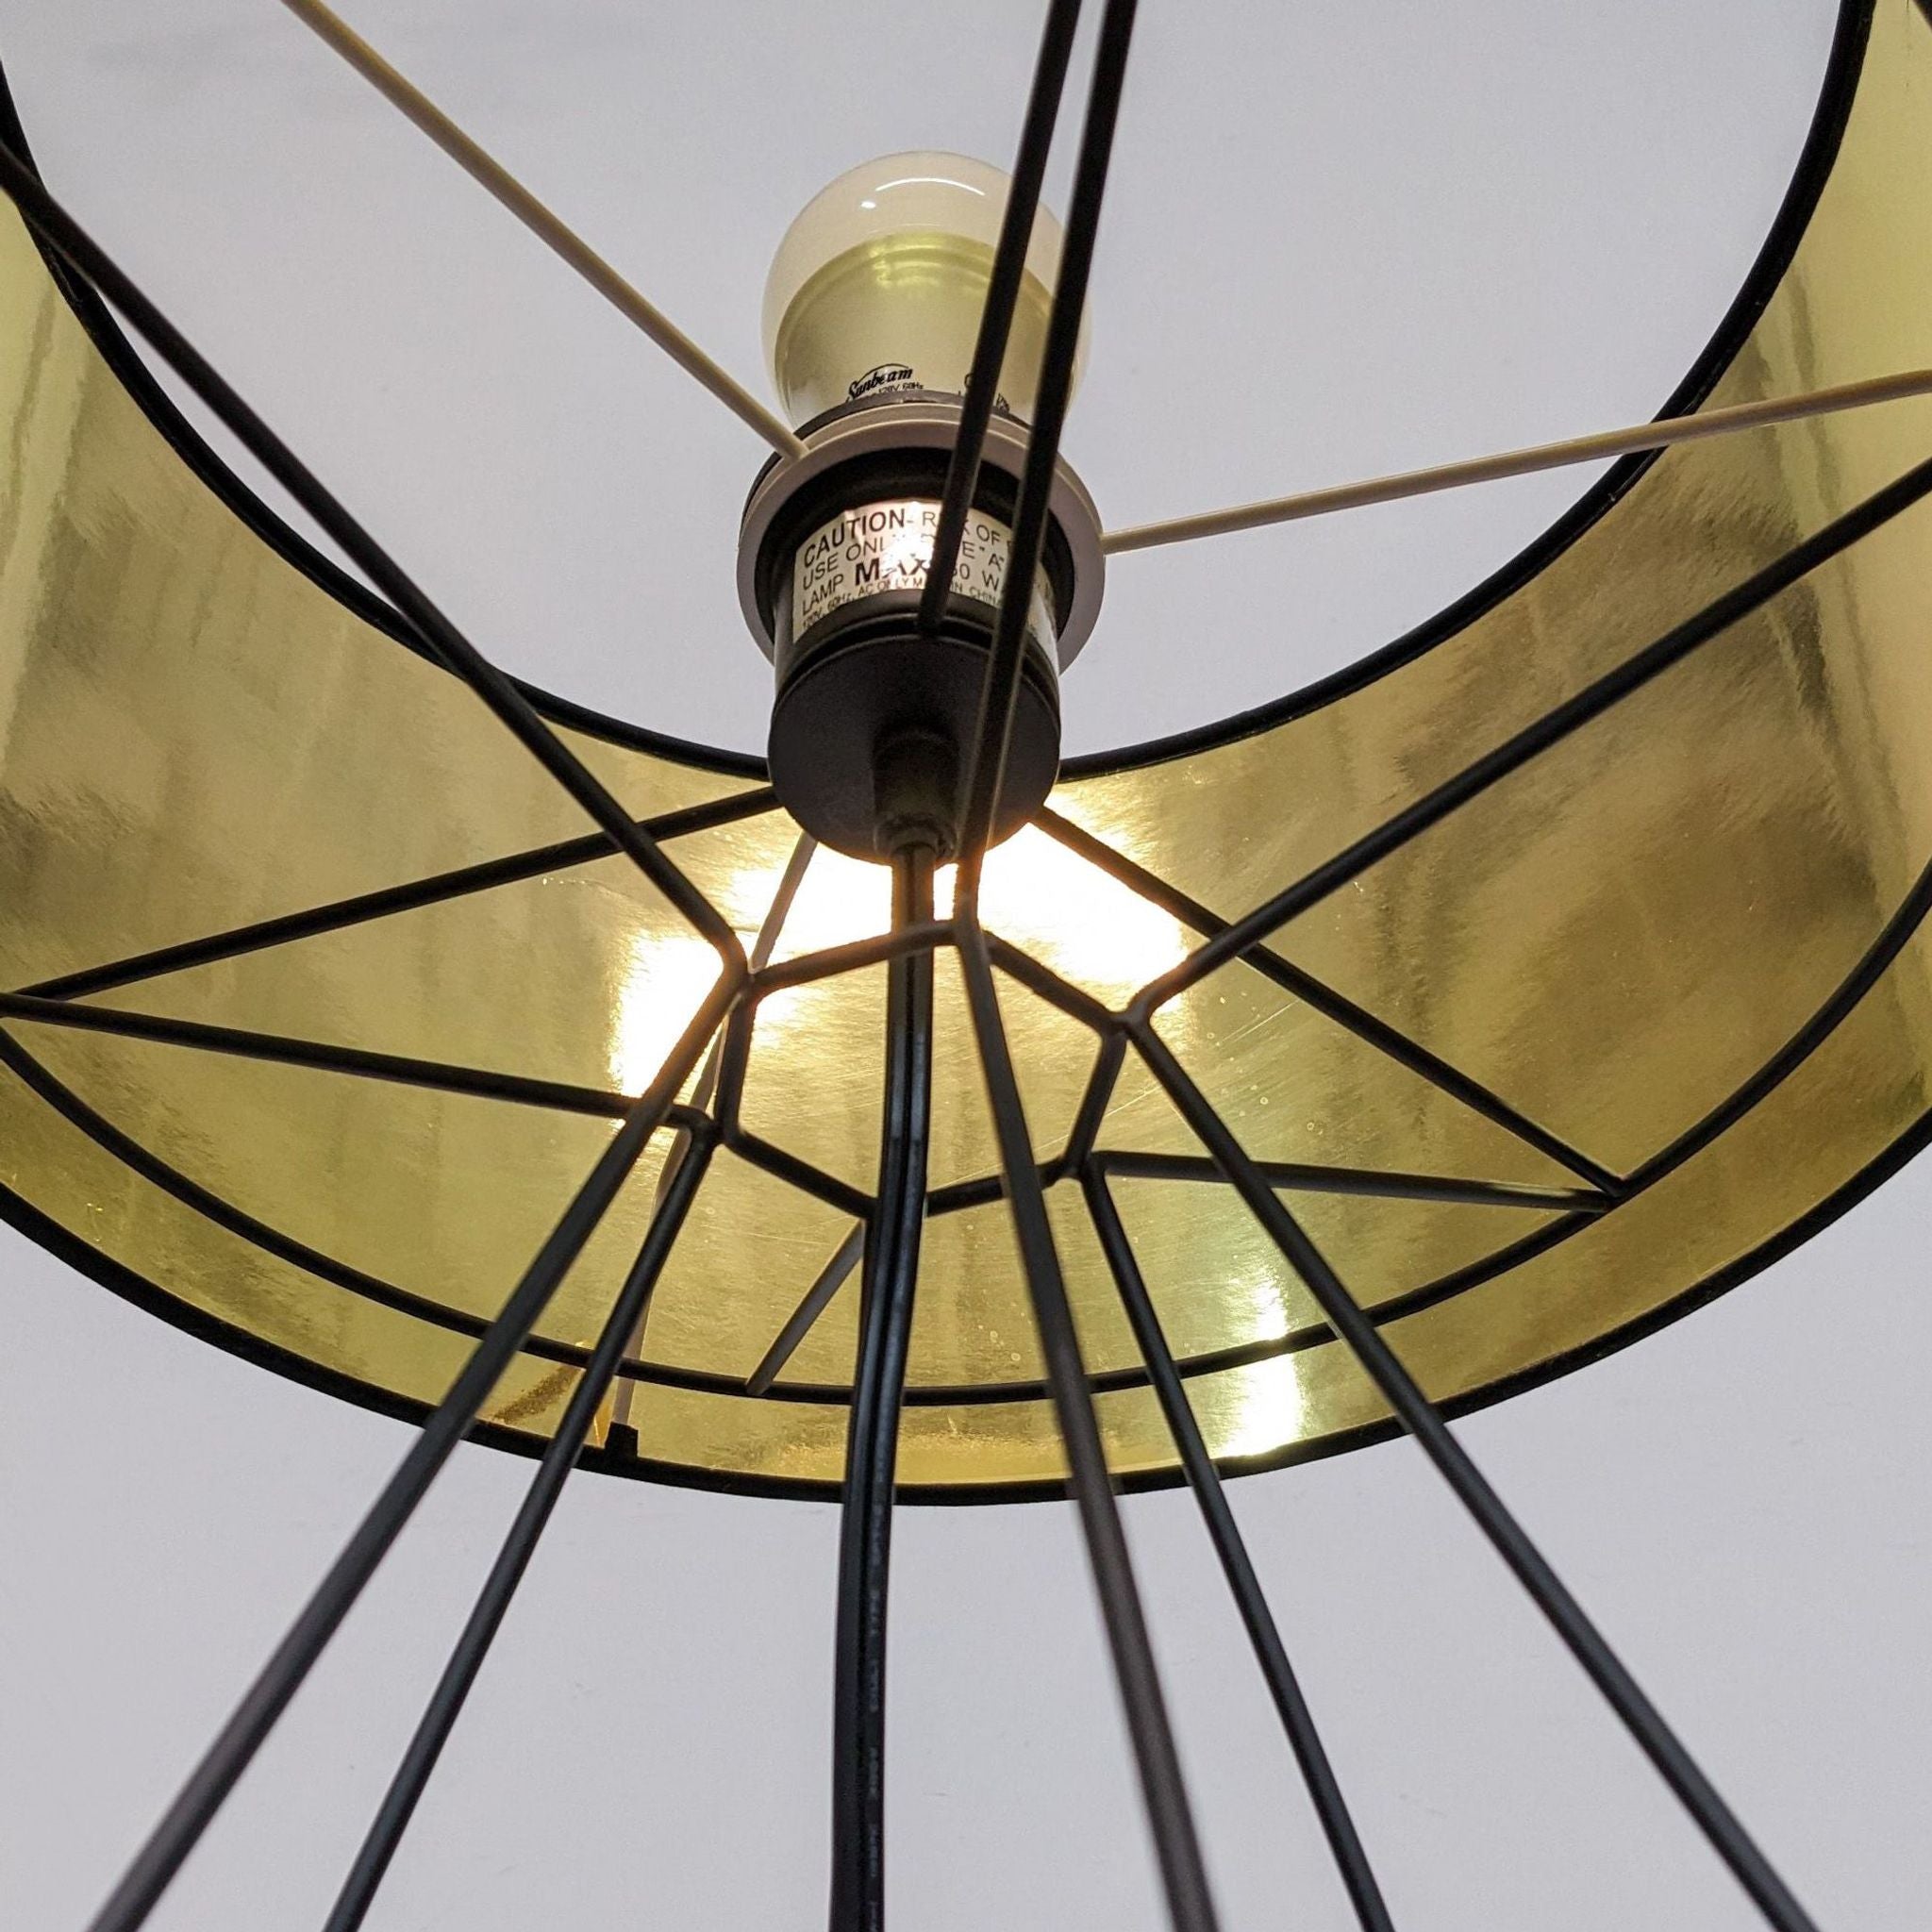 Close-up of Reperch lighting, showing light bulb inside a gold-lined black lampshade with a wireframe design.